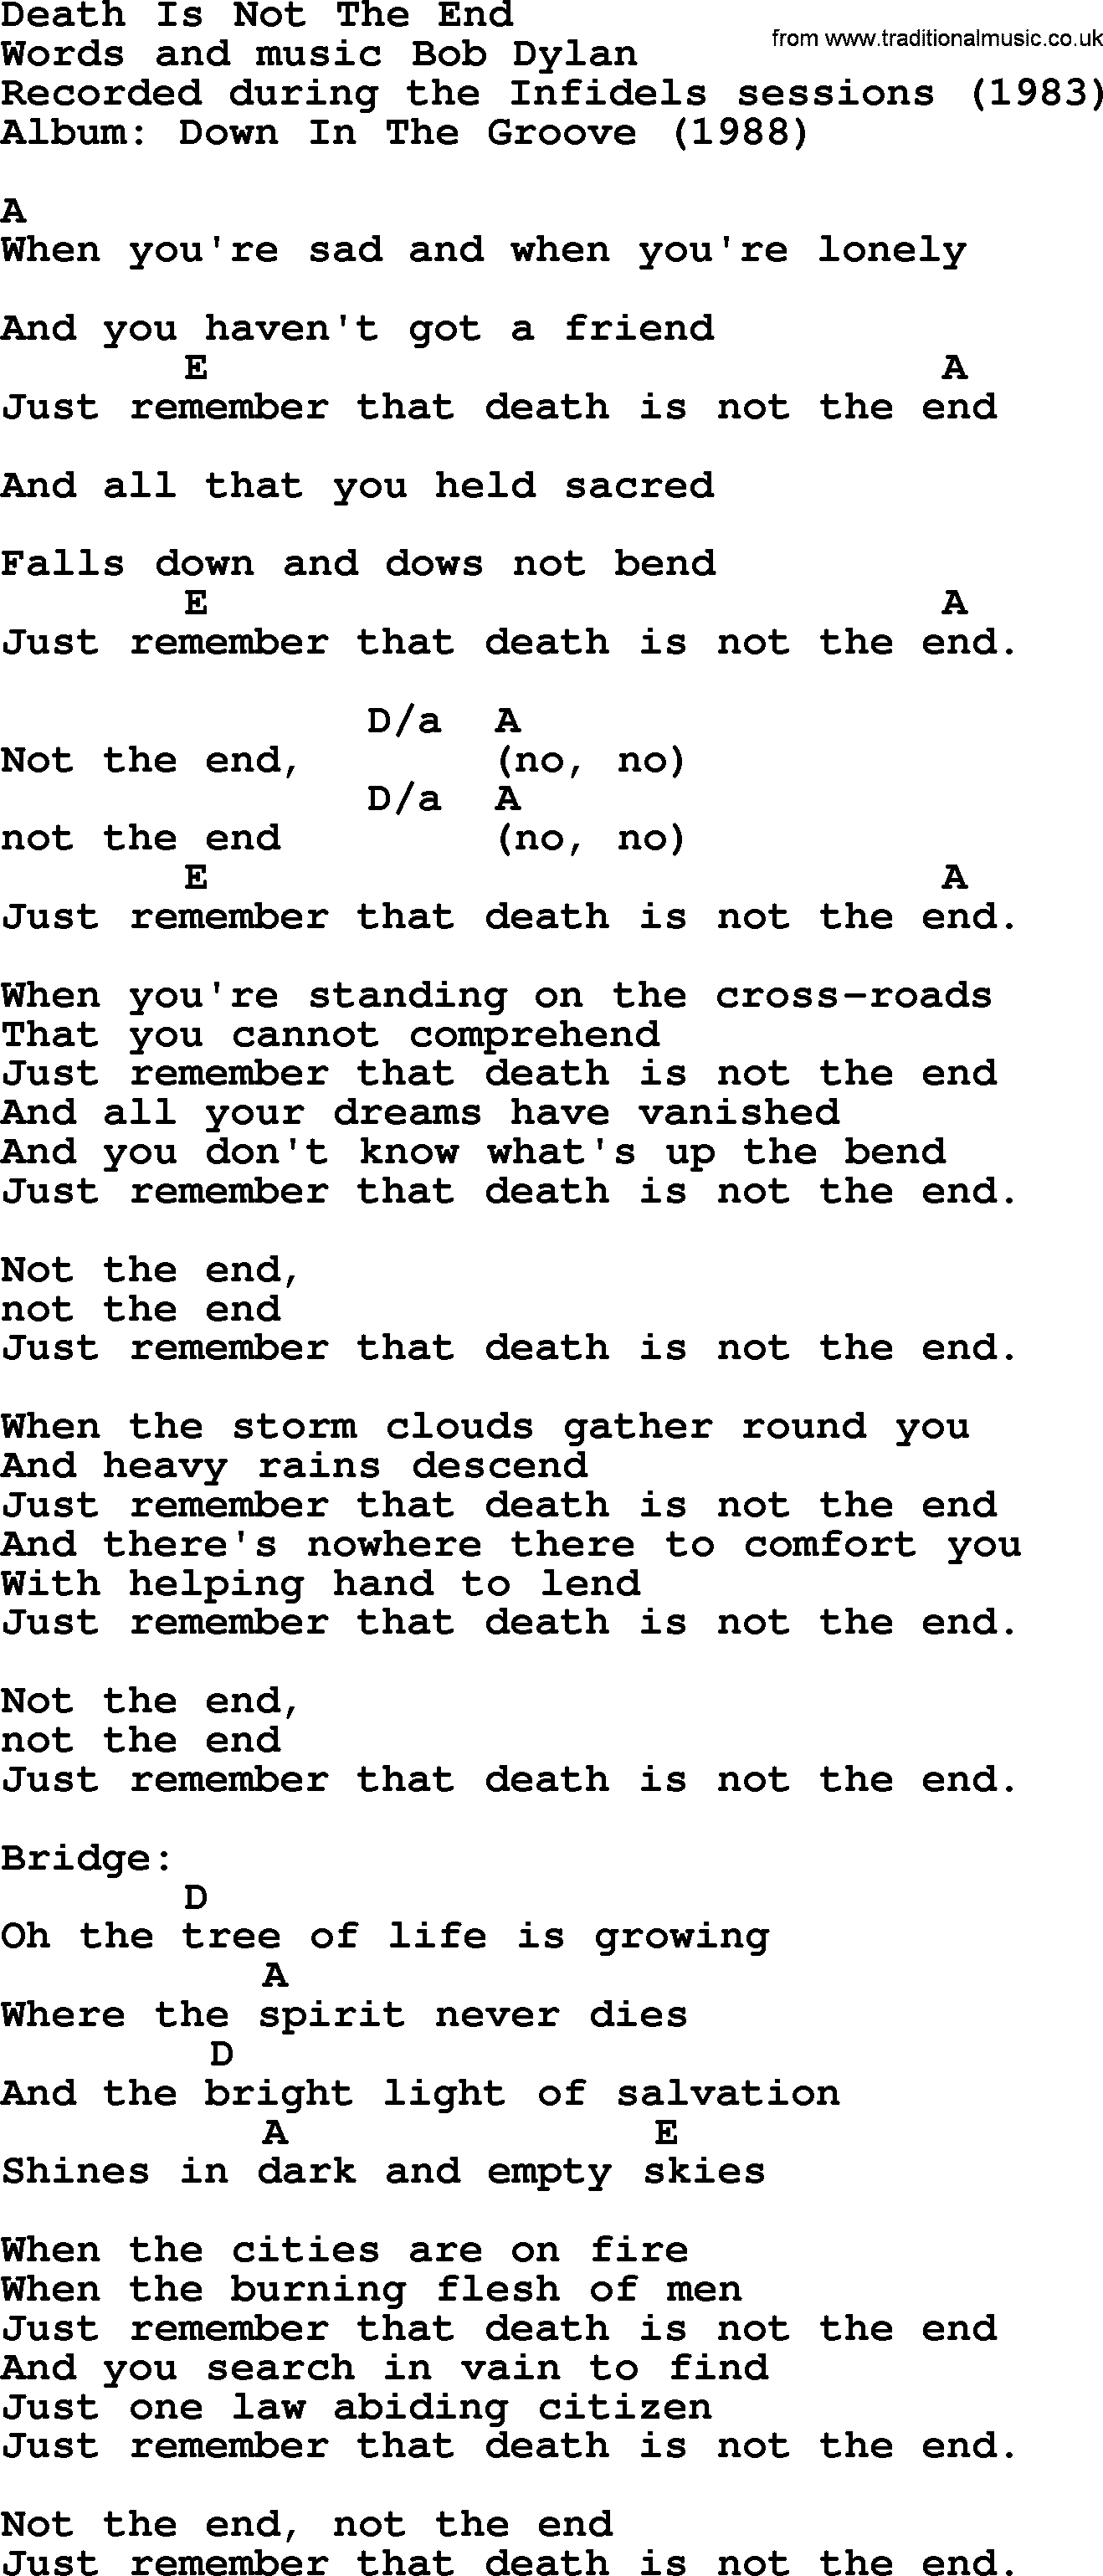 Bob Dylan song, lyrics with chords - Death Is Not The End